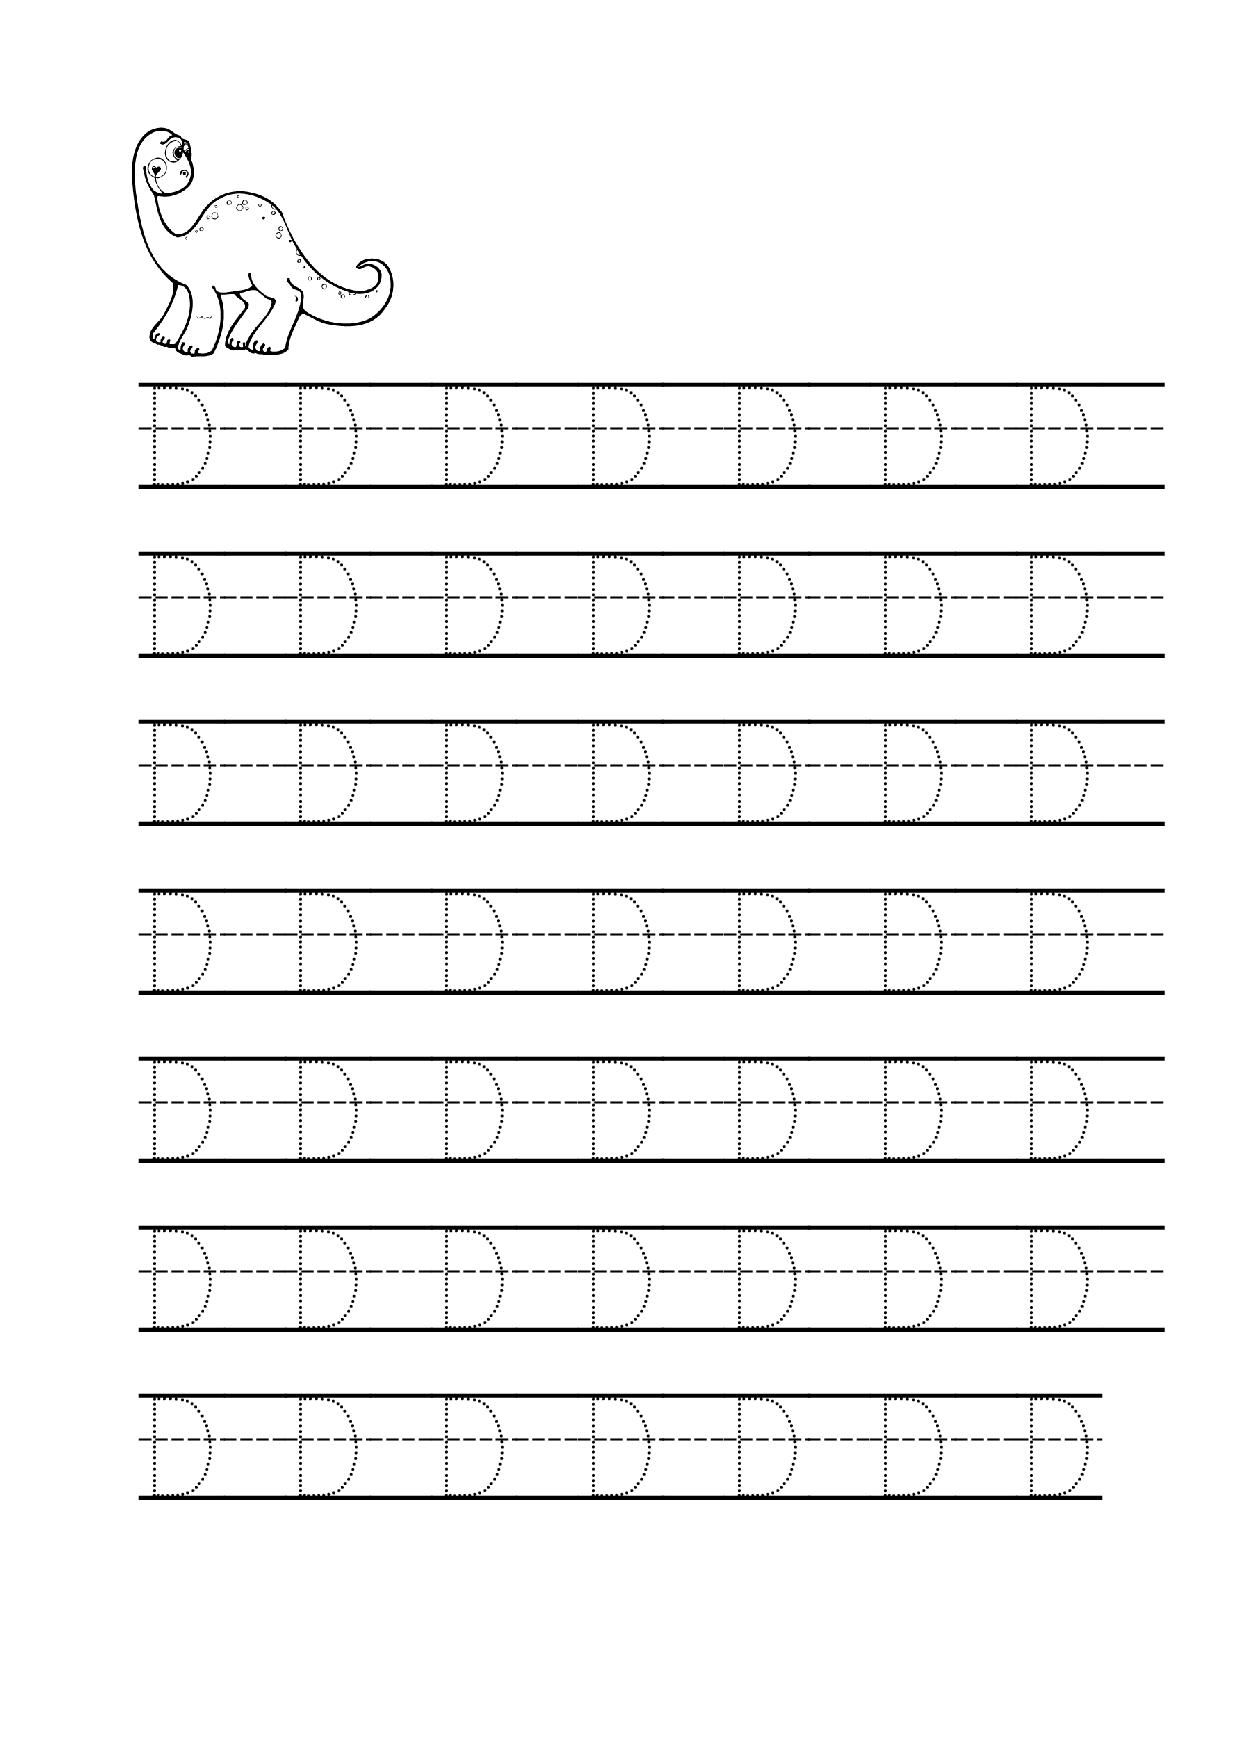 Tracing Letter D Worksheets For Preschool | Letter D throughout Letter Tracing D